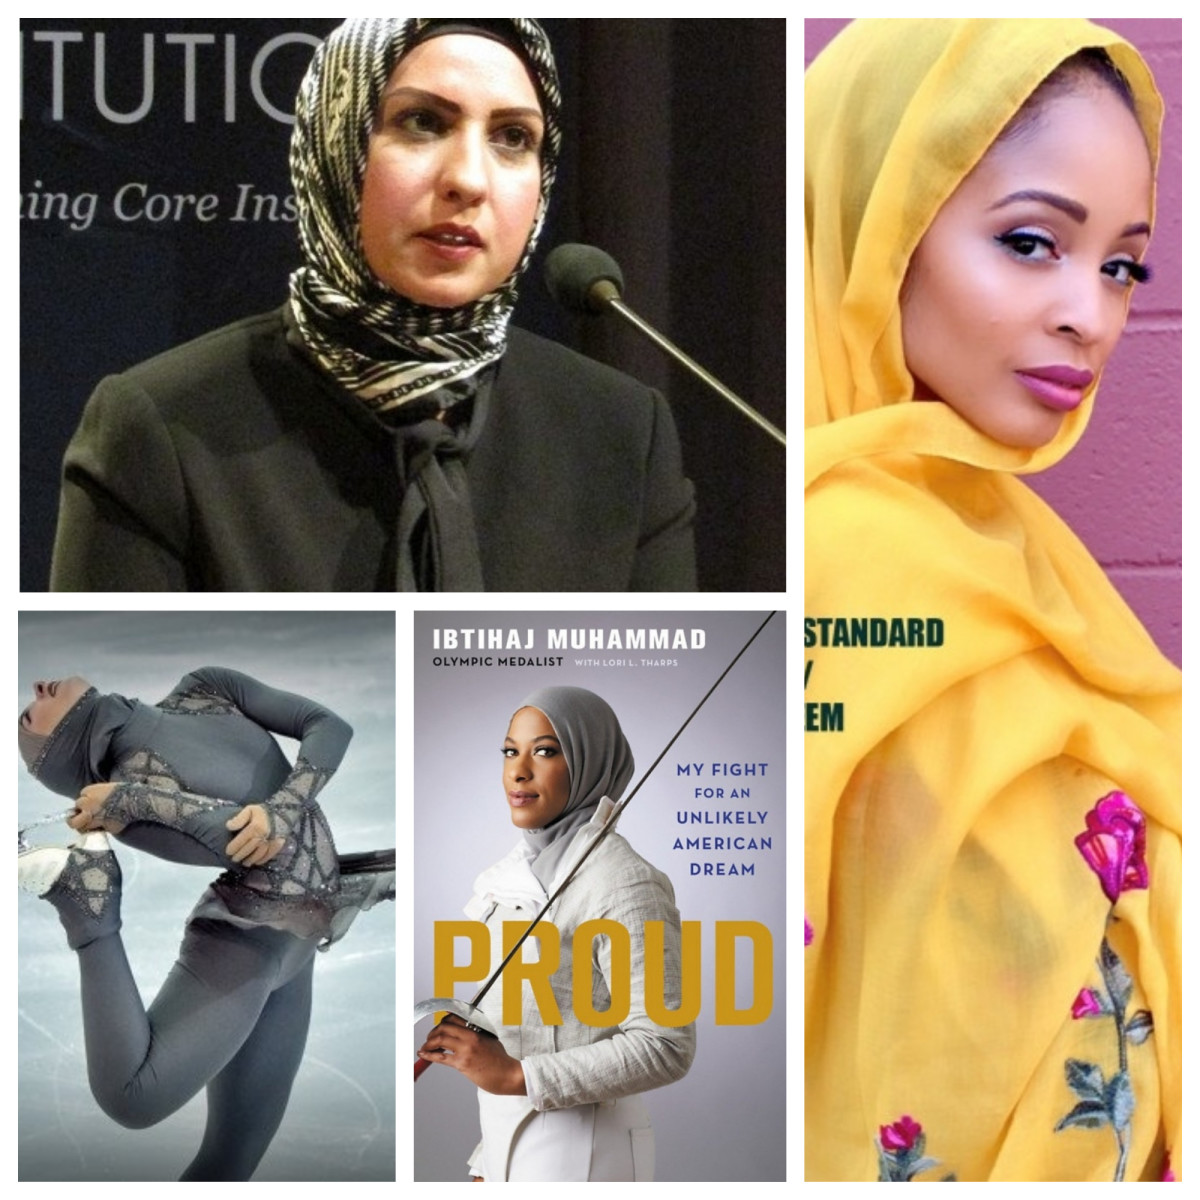 This article celebrates Hijabi women shattering glass ceilings around the globe as athletes, politicians, musicians, and activists